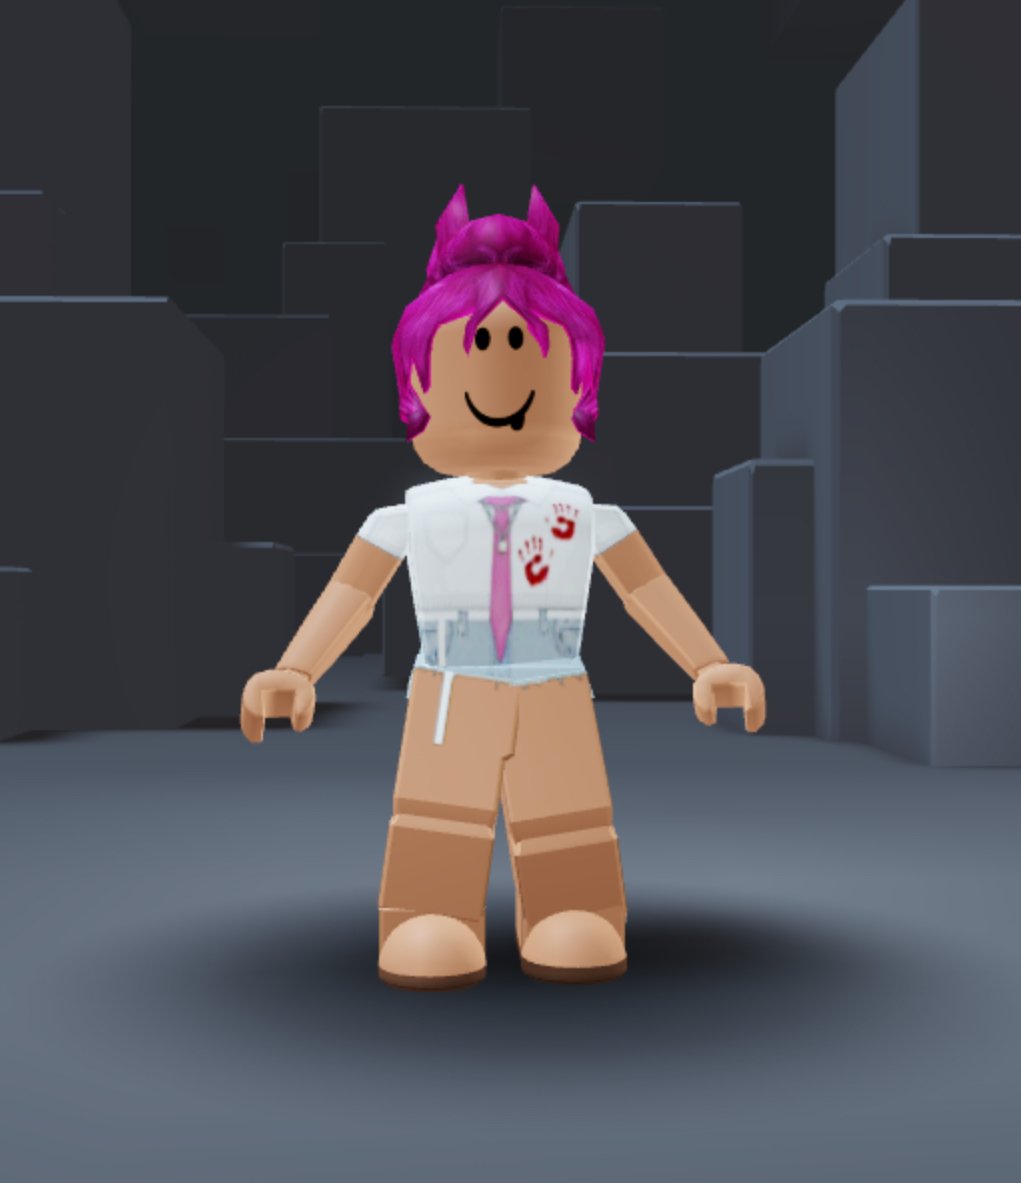 Www Robloxfits Com Roblox Fits - ute outfits roblox